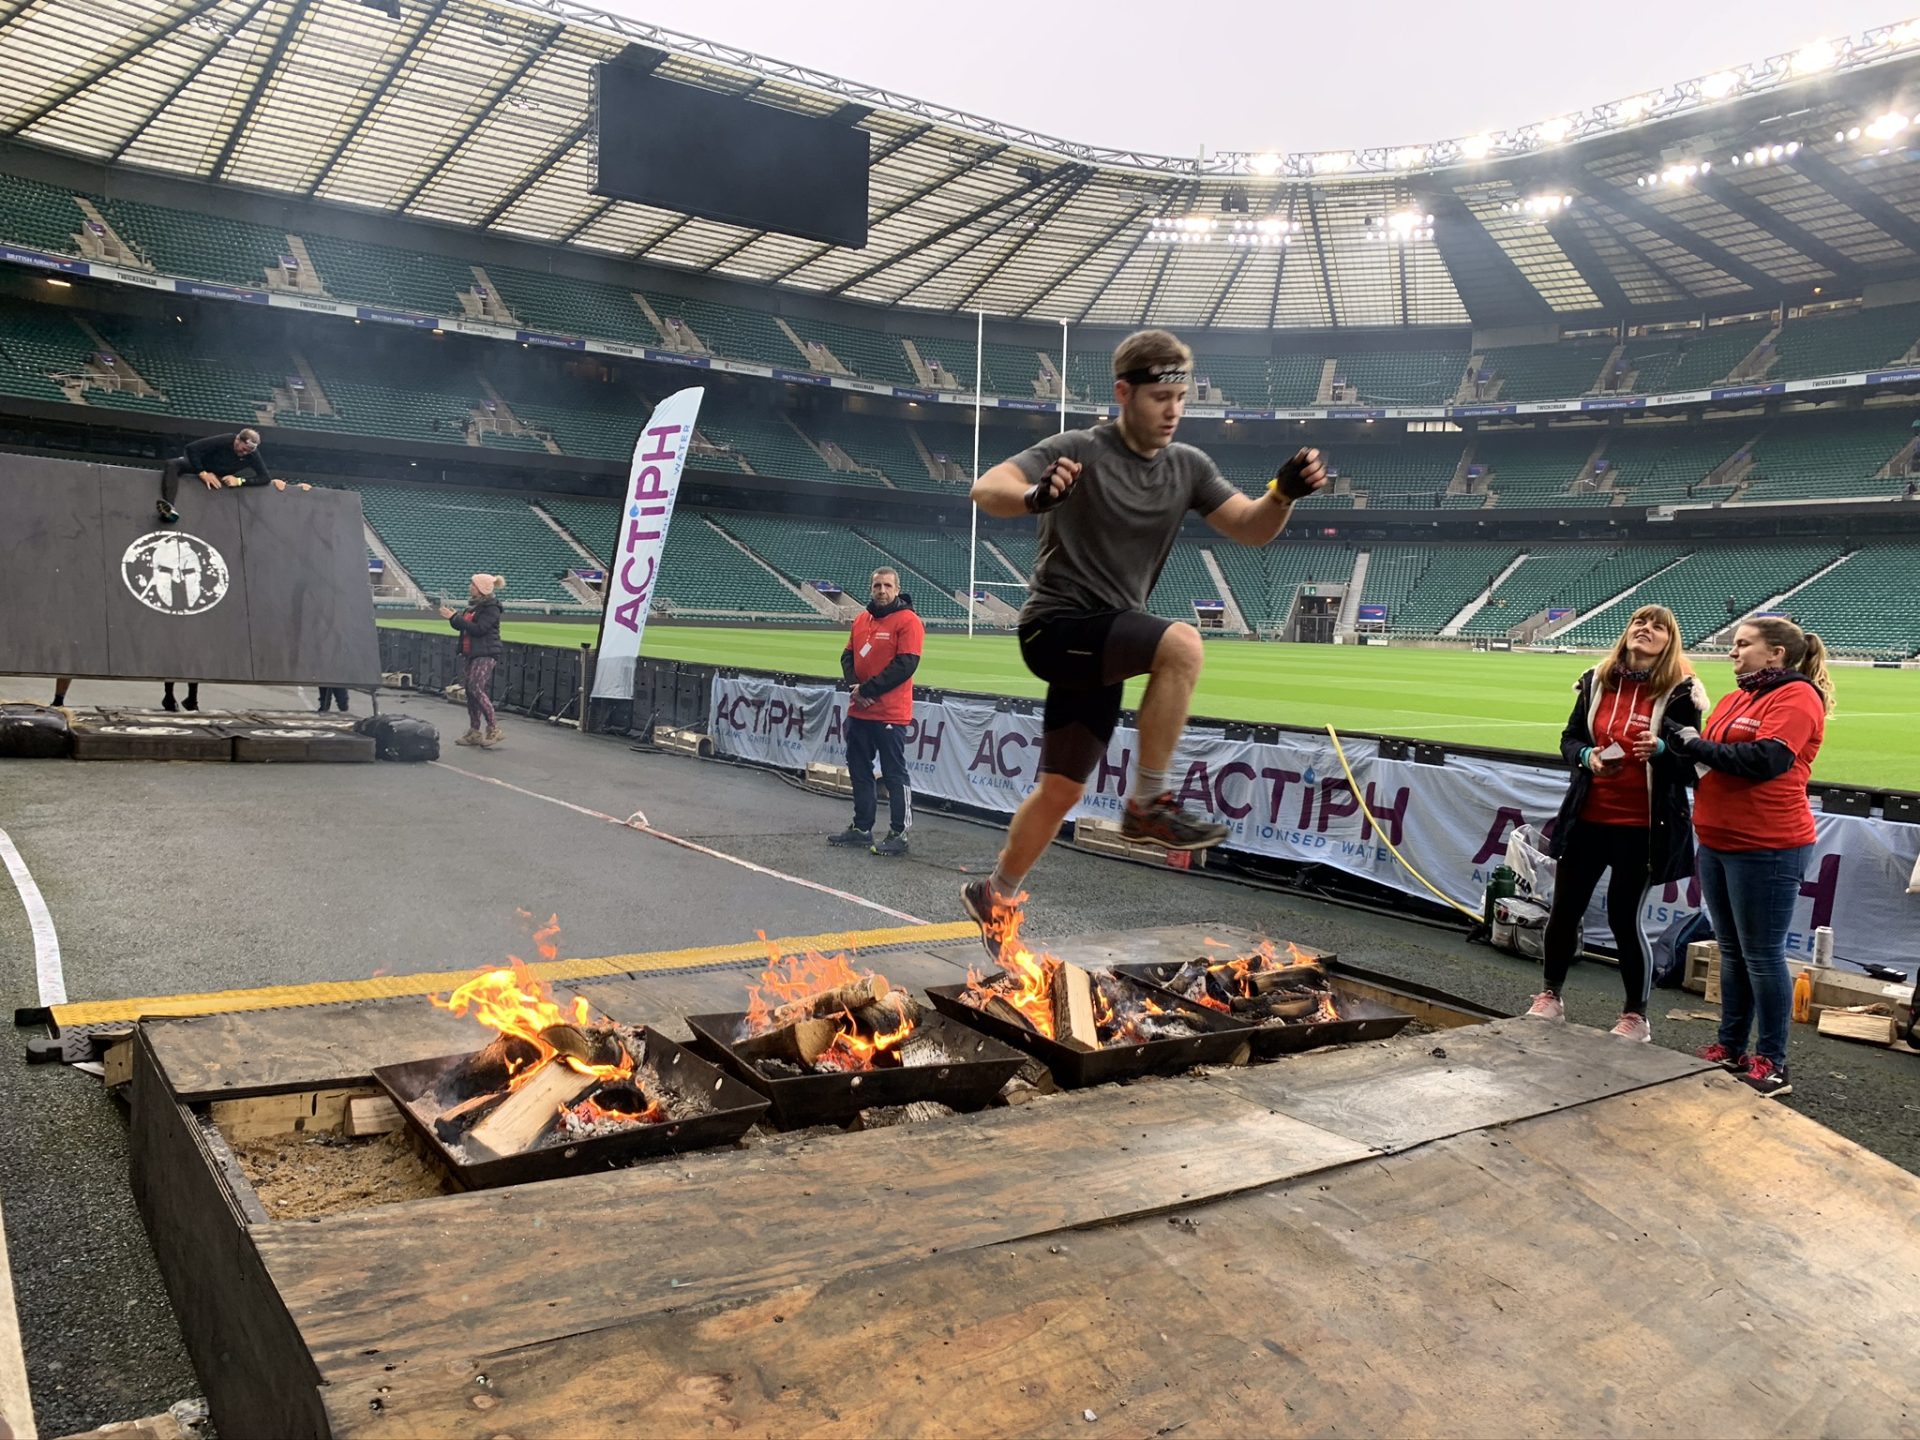 Thousands compete in Spartan Stadion Race obstacle course at Twickenham